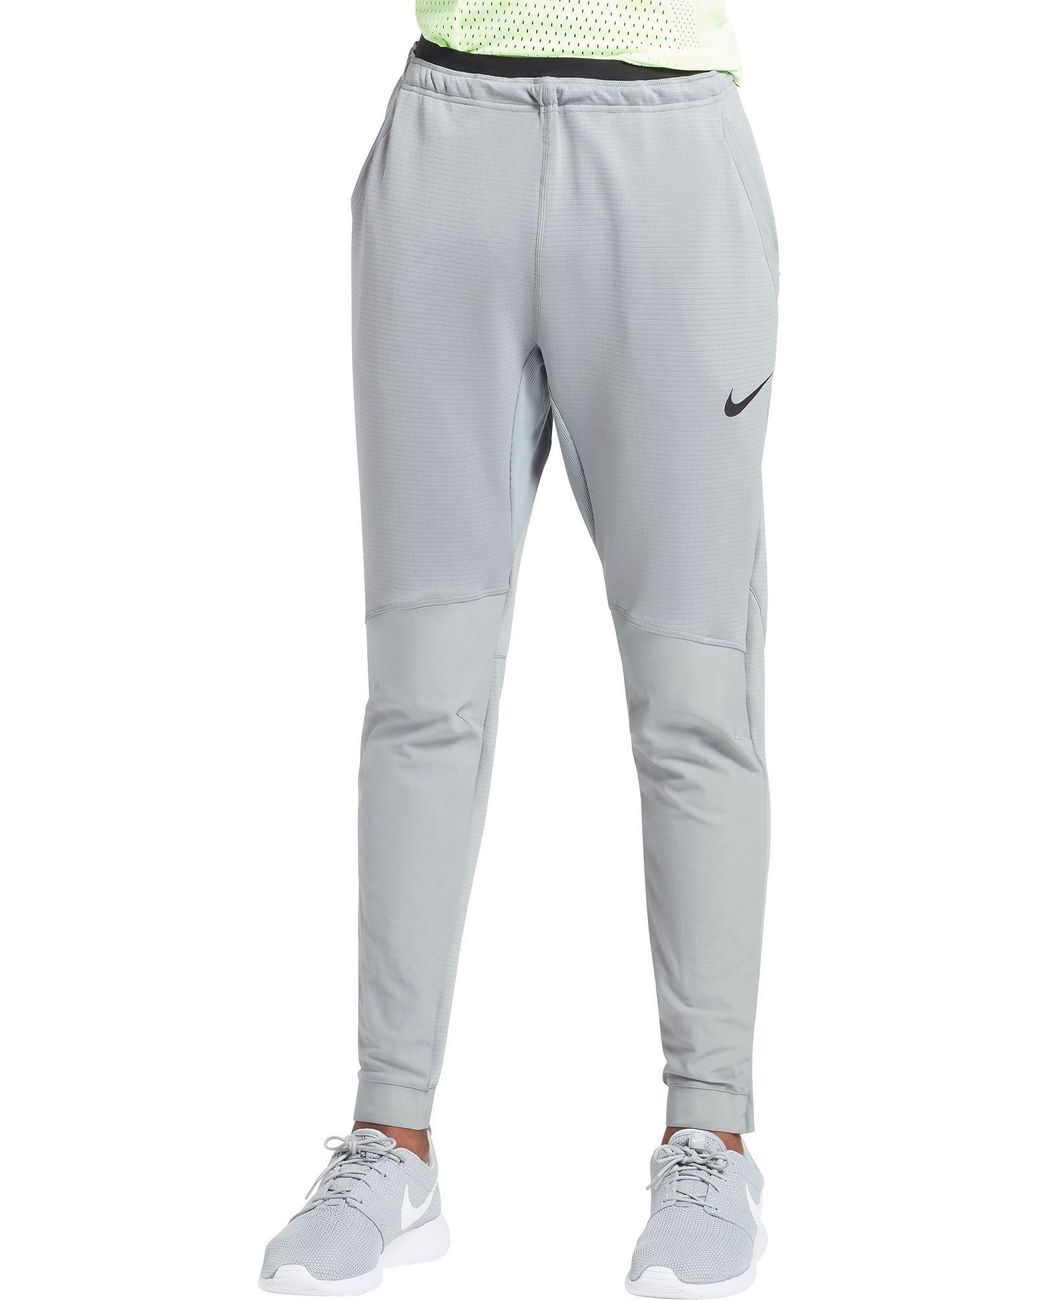 Nike Synthetic Pro Pants in Gray for Men - Lyst